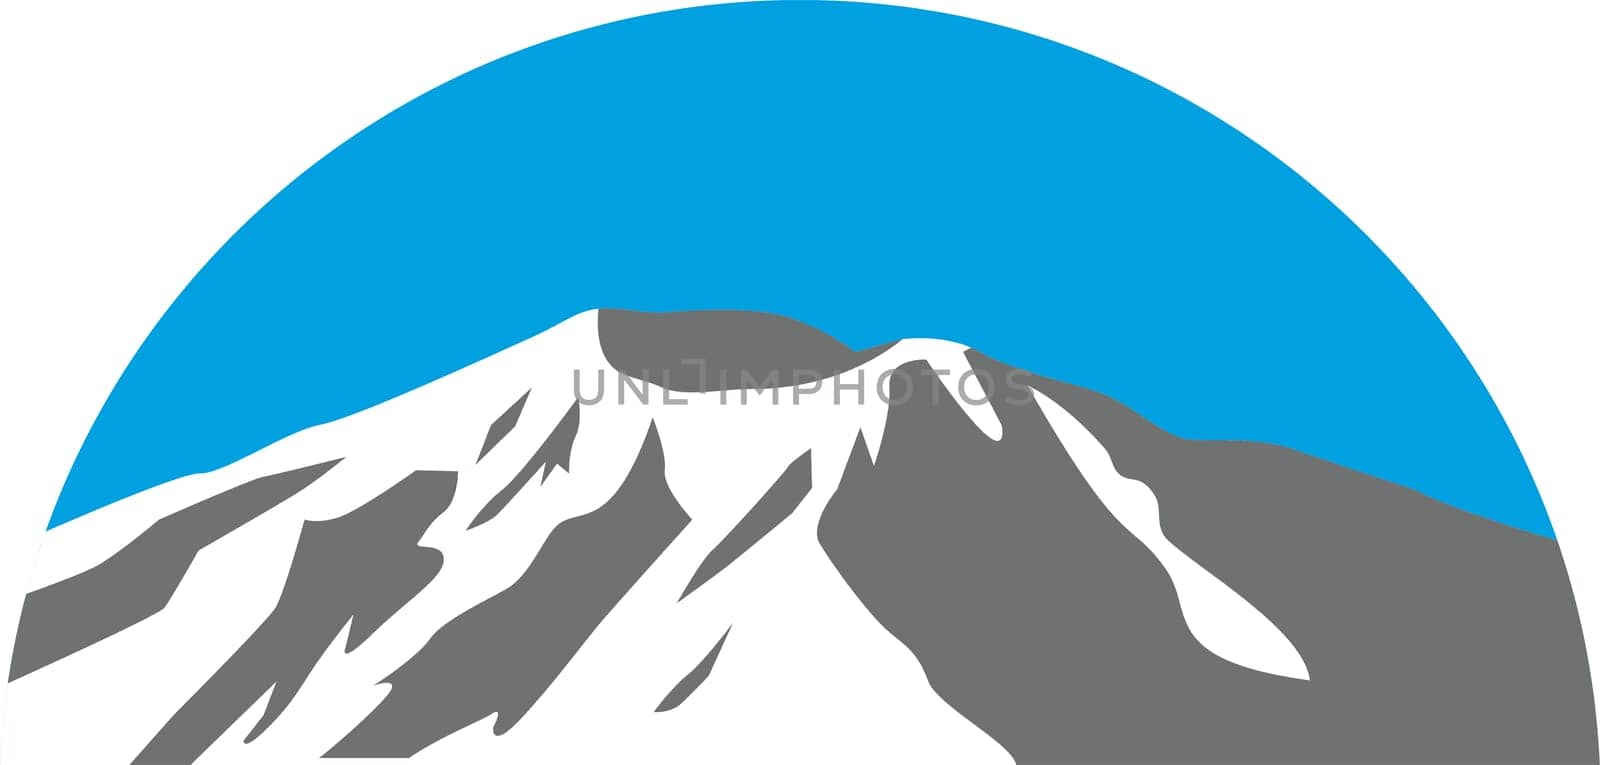 Retro style illustration of Mount Haldane situated in the region Yukon Territory in Canada set inside half oval circle on isolated background done in black and white.